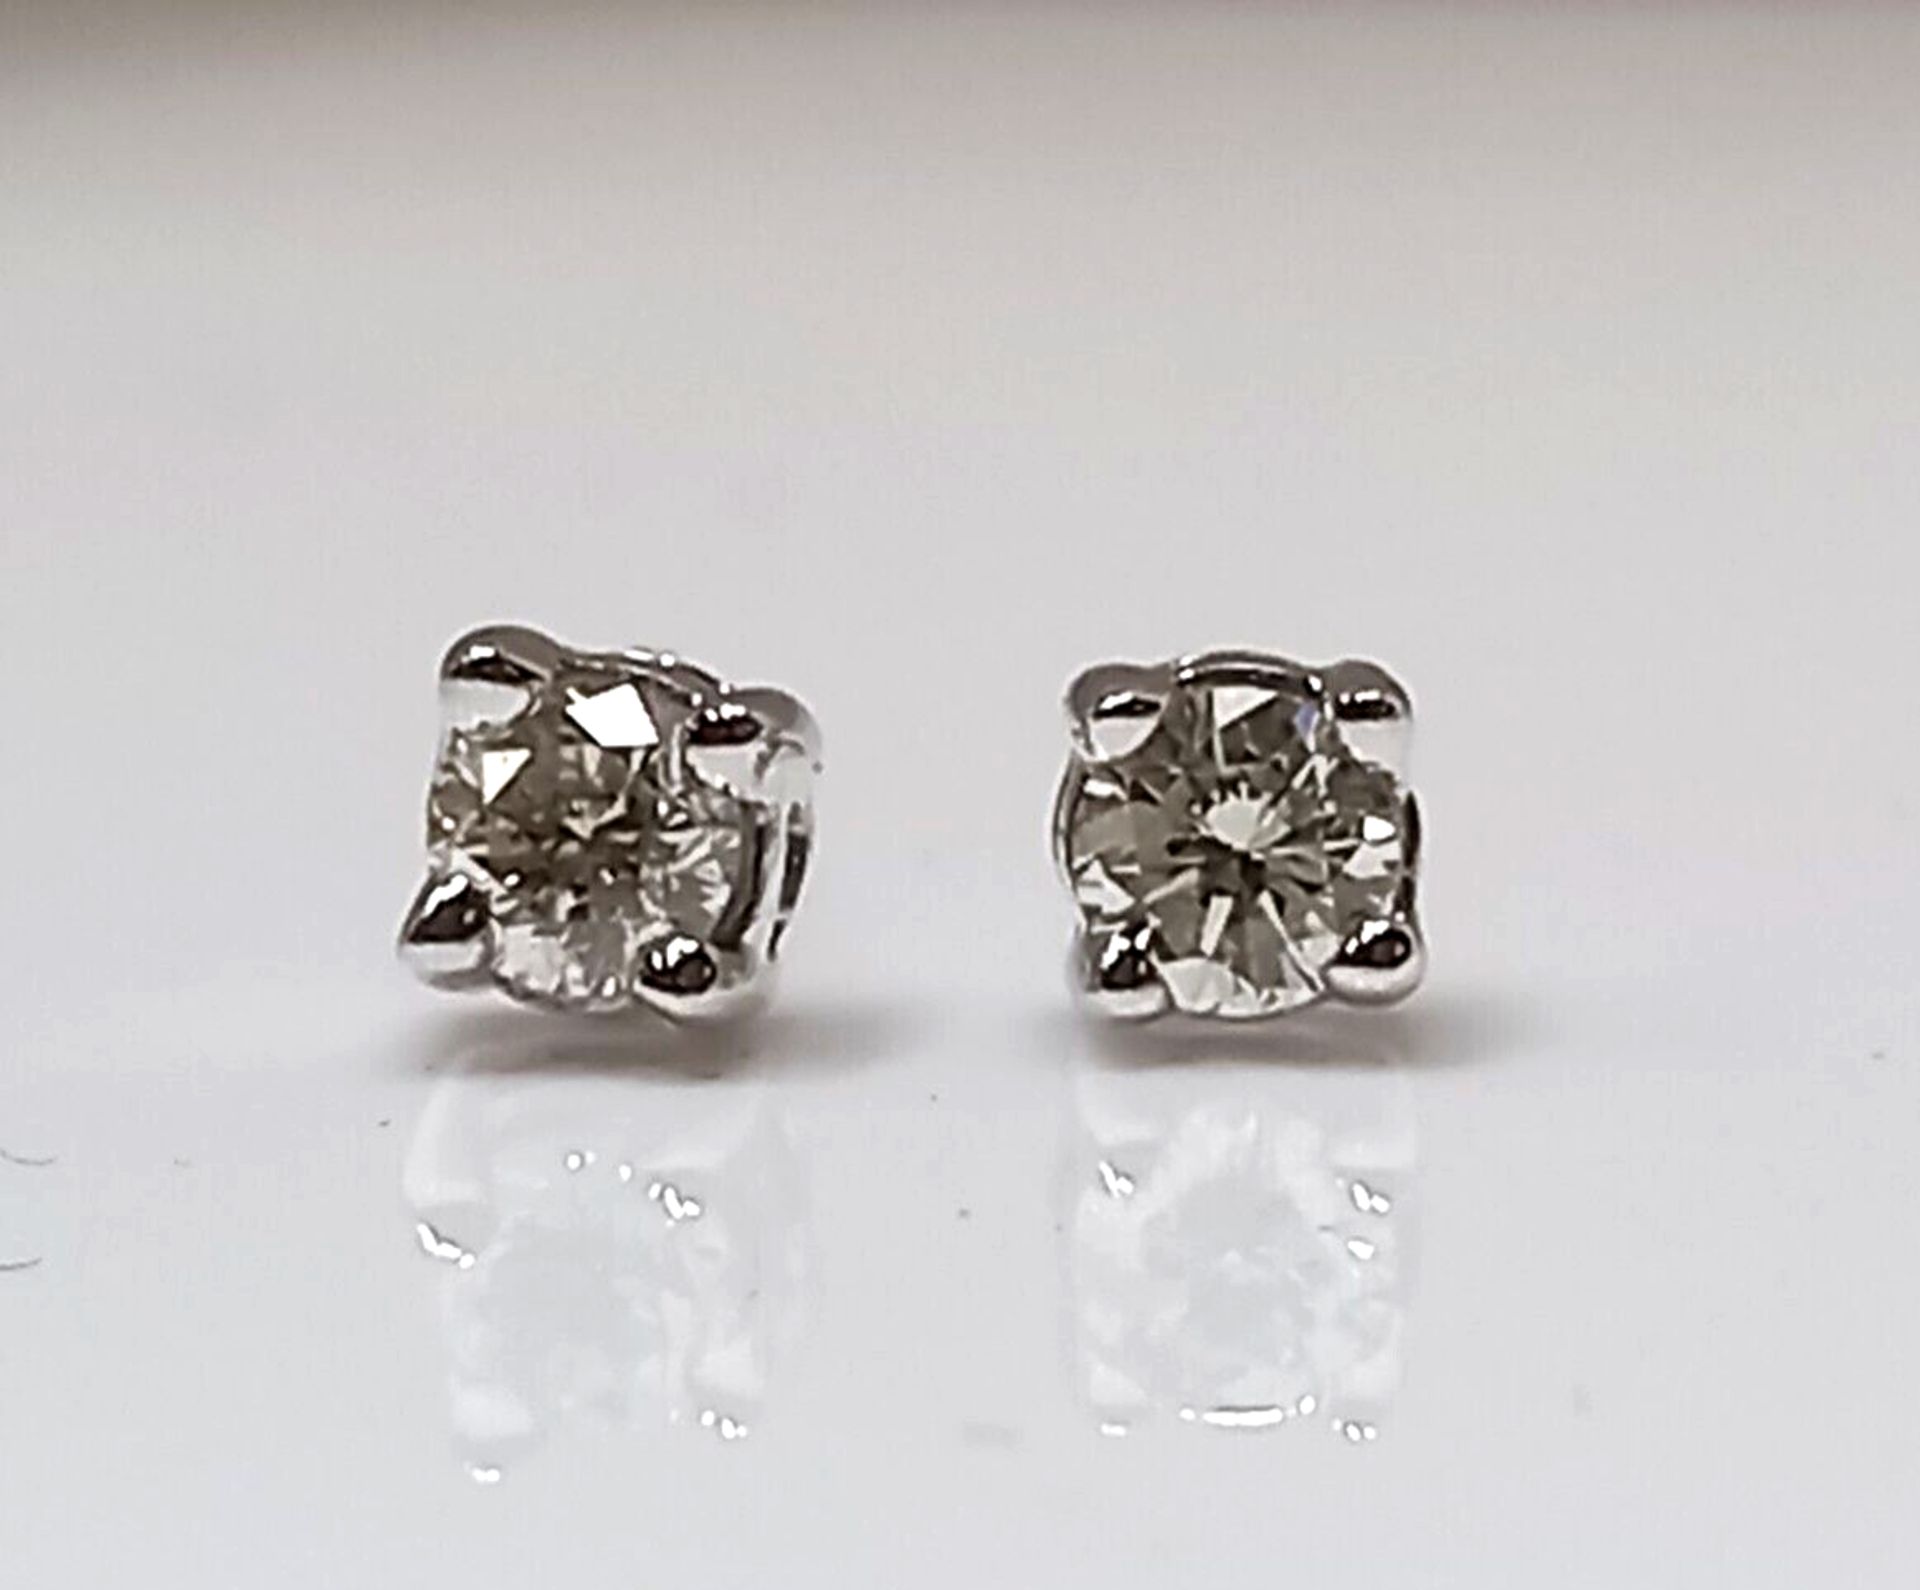 0.50CT DIAMOND STUD EARRINGS 18CT WHITE GOLD IN GIFT BOX WITH VALUATION CERTIFICATE OF £2495 - Image 2 of 5